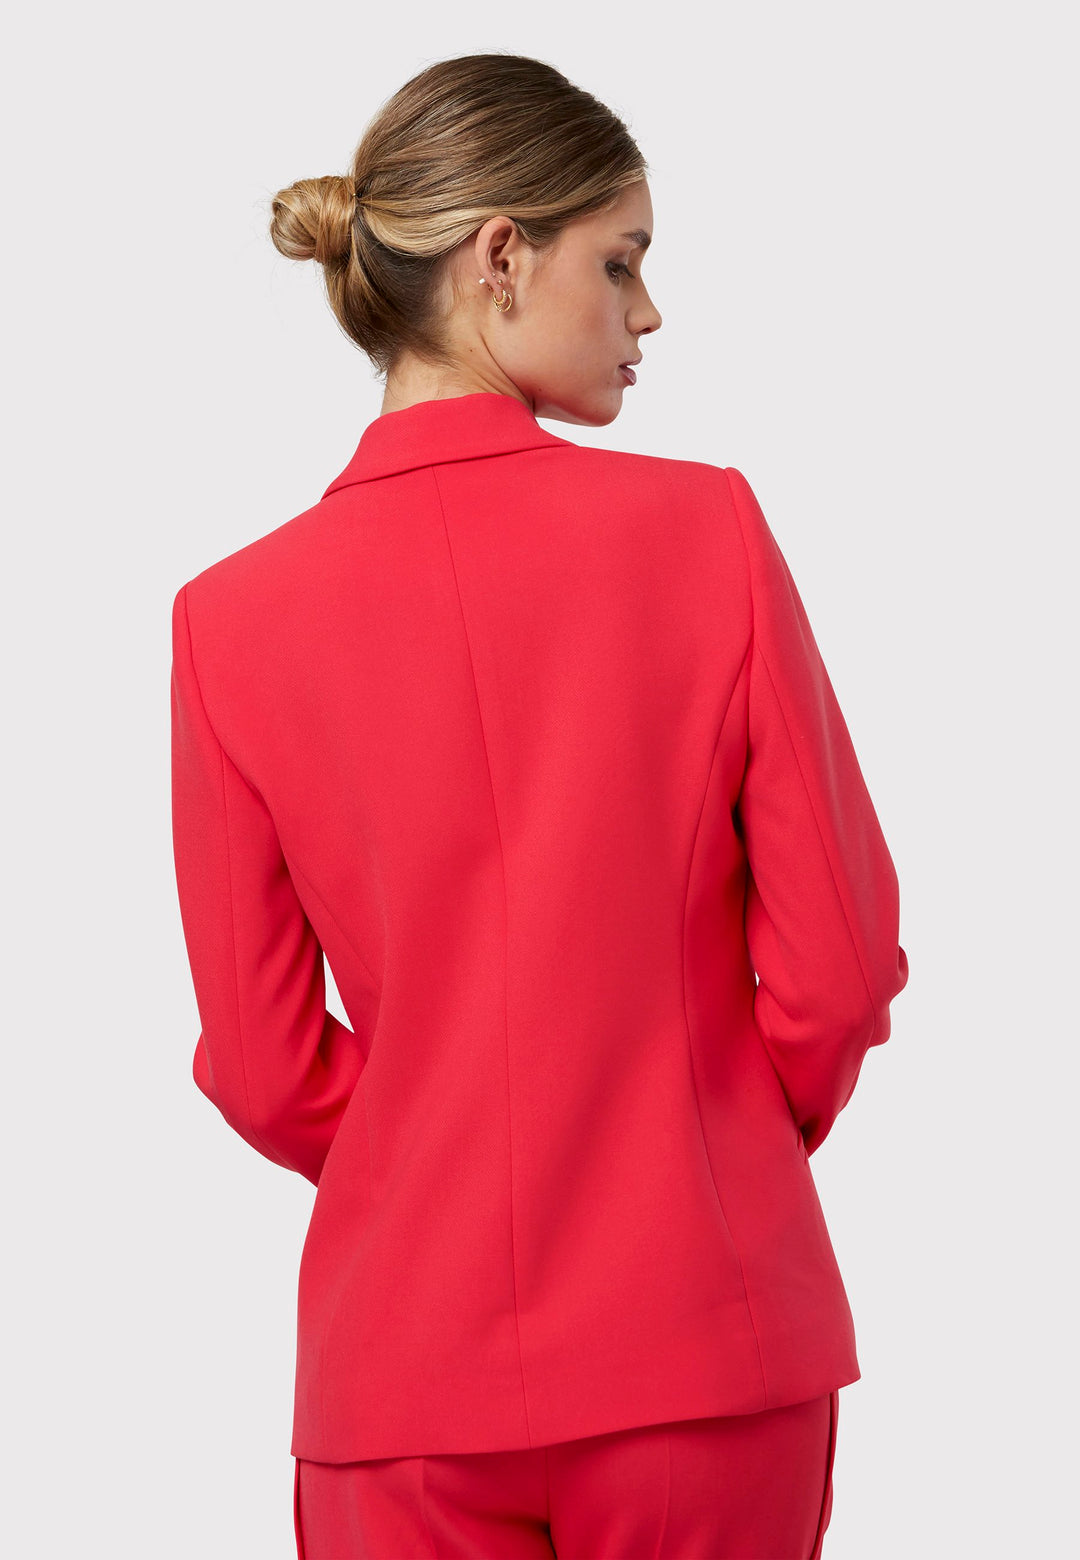 Add a contemporary edge to your wardrobe with the Marlowe Jacket, rendered in a striking begonia. This modern piece features a sleek collar and revere a singular button fastening. For a statement monochrome look pair with the matching Georgiana Trouser and Stella Begonia top to achieve a look that seamlessly blends sophistication with a bold, fashion-forward aesthetic.